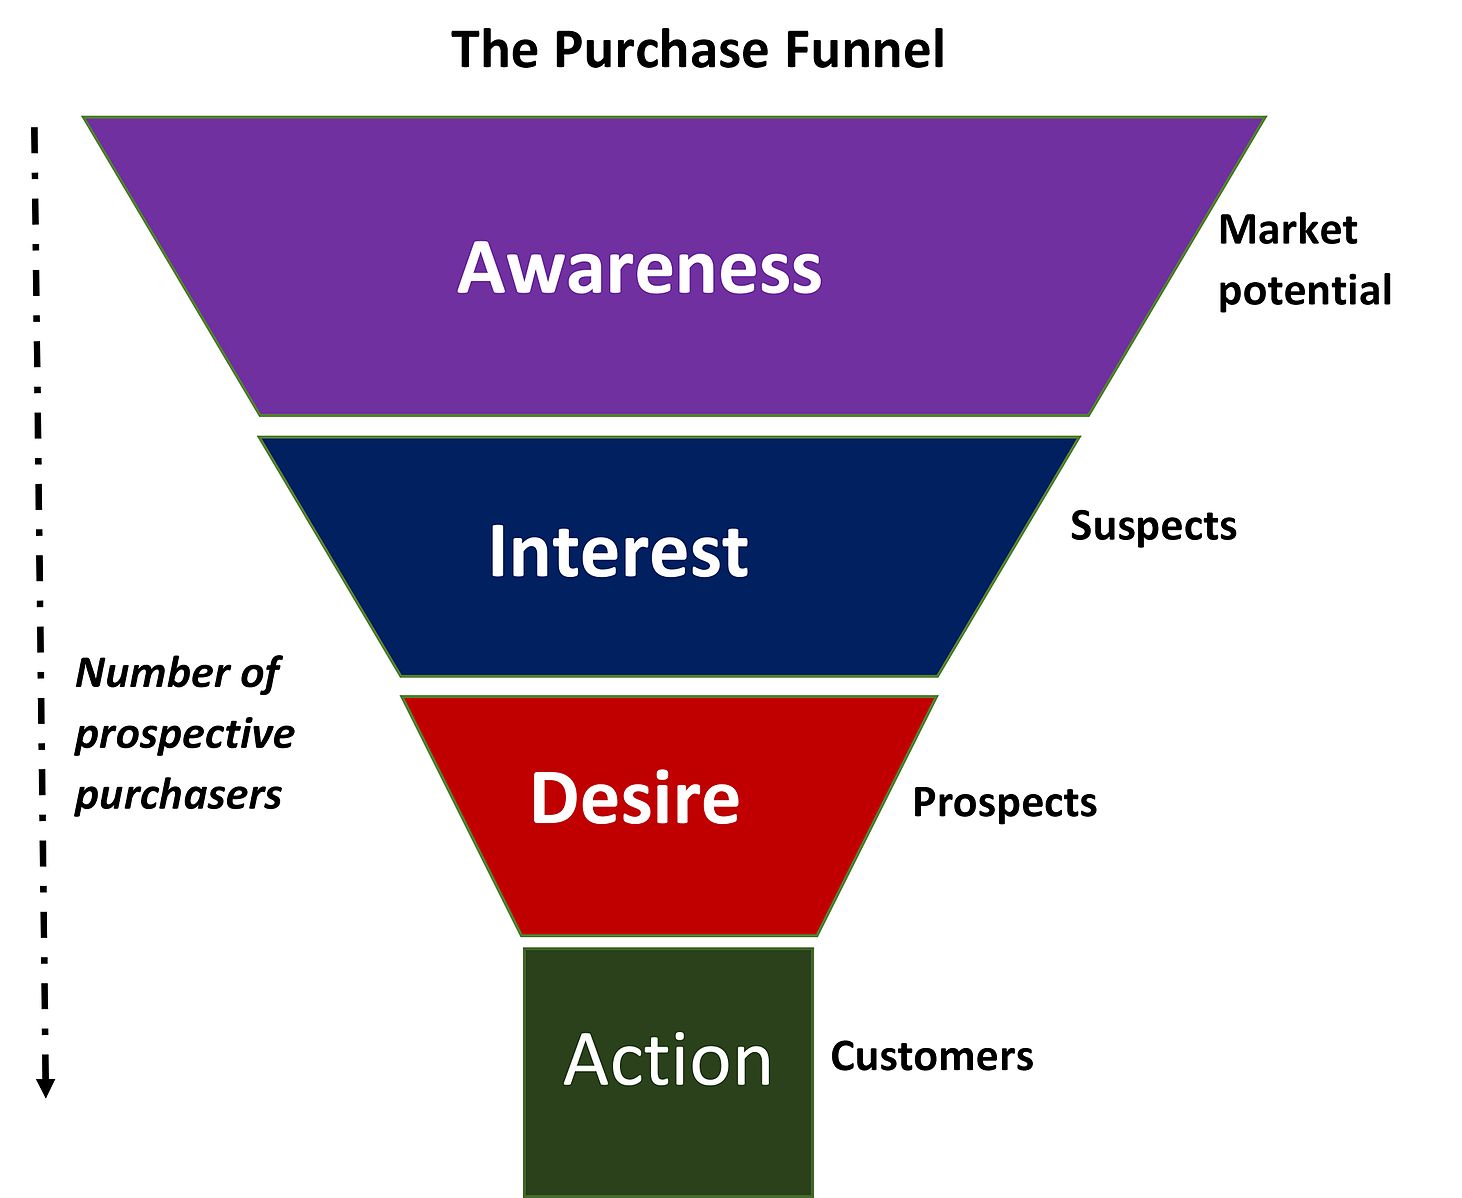 The traditional purchase funnel moves from awareness to interest, then to desire, and finally action.